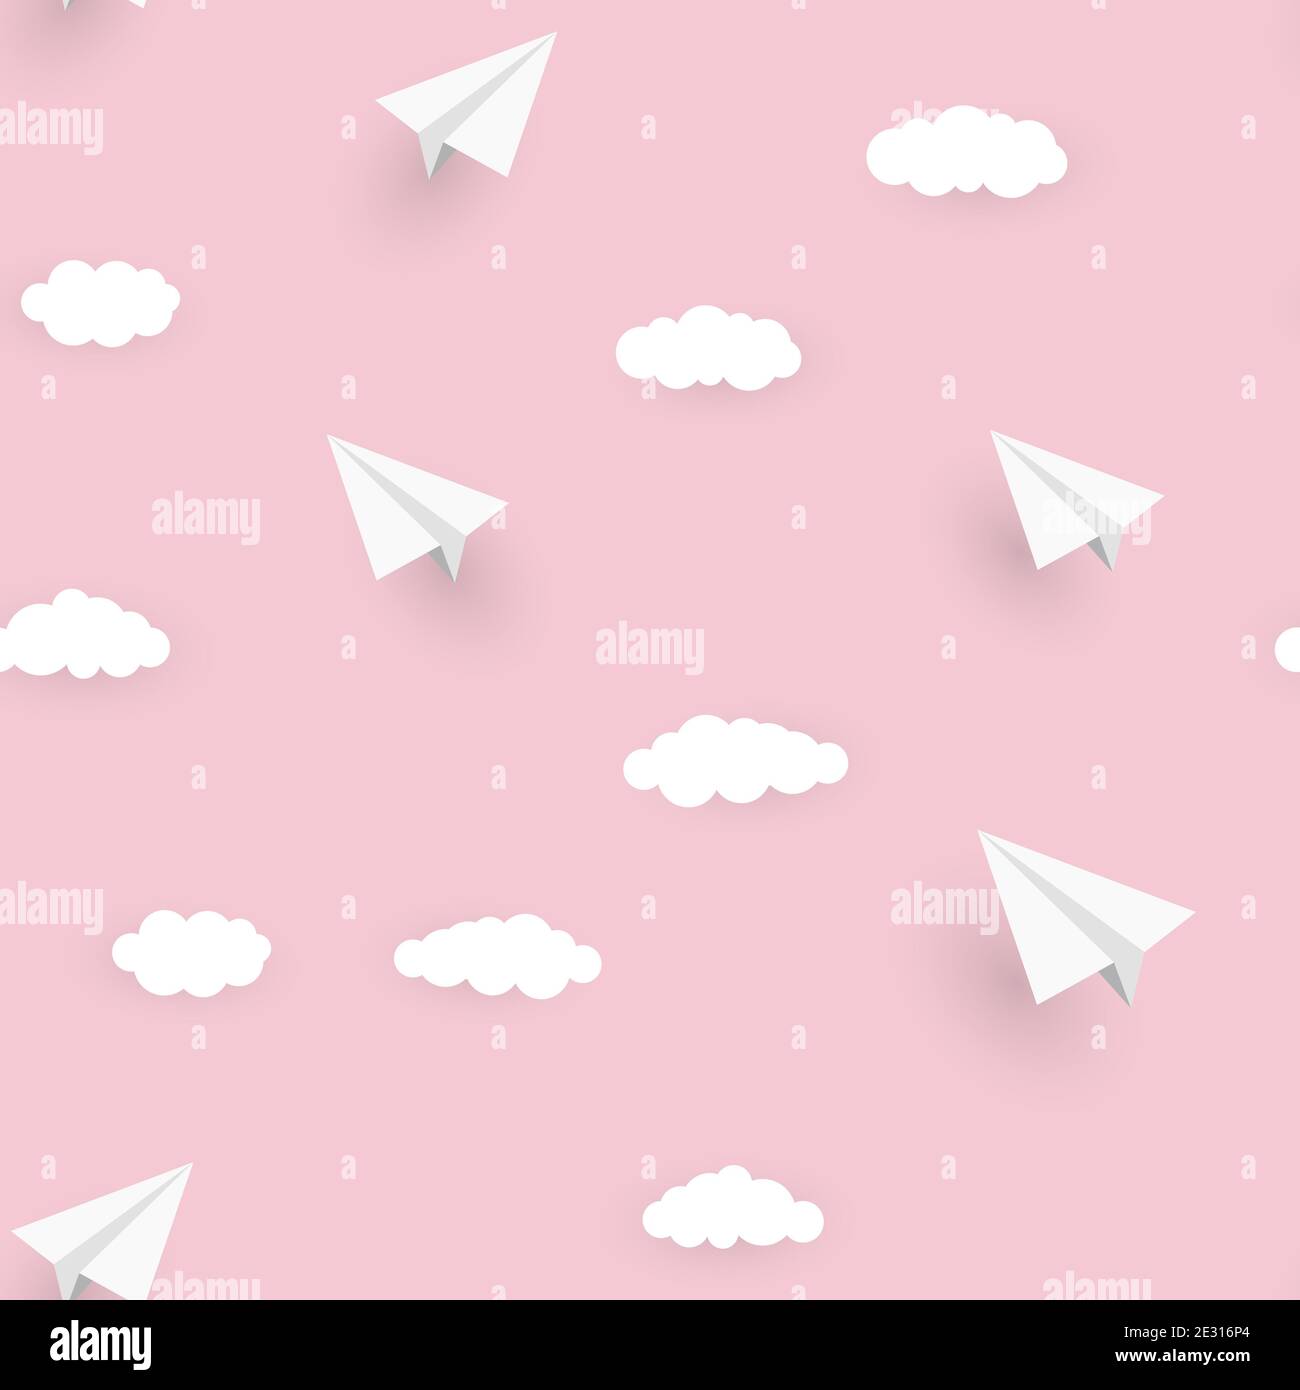 Paper Airplane and Clouds Seamless Pattern Background Illustration Stock Photo